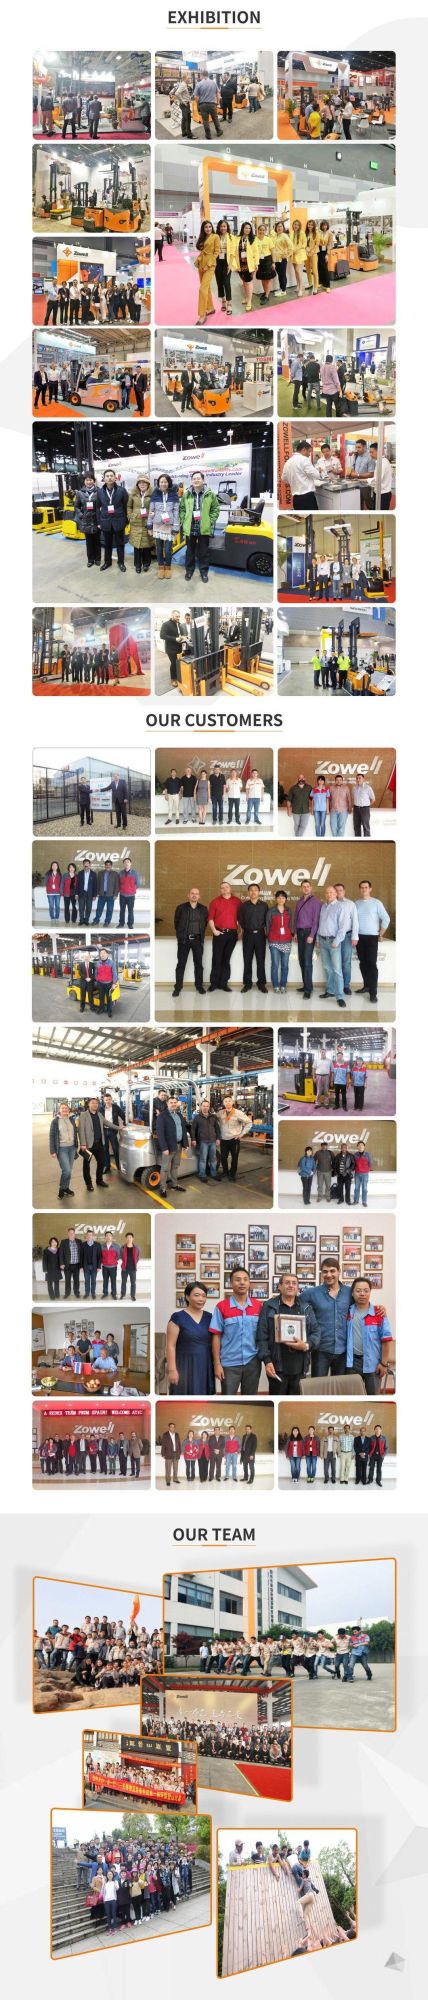 Zowell 3t Electric Multi-Directonal Full Direction Reach Truck Forklift for Long Length Cargo with Fork Positioner 4 Forks Lithium Battery